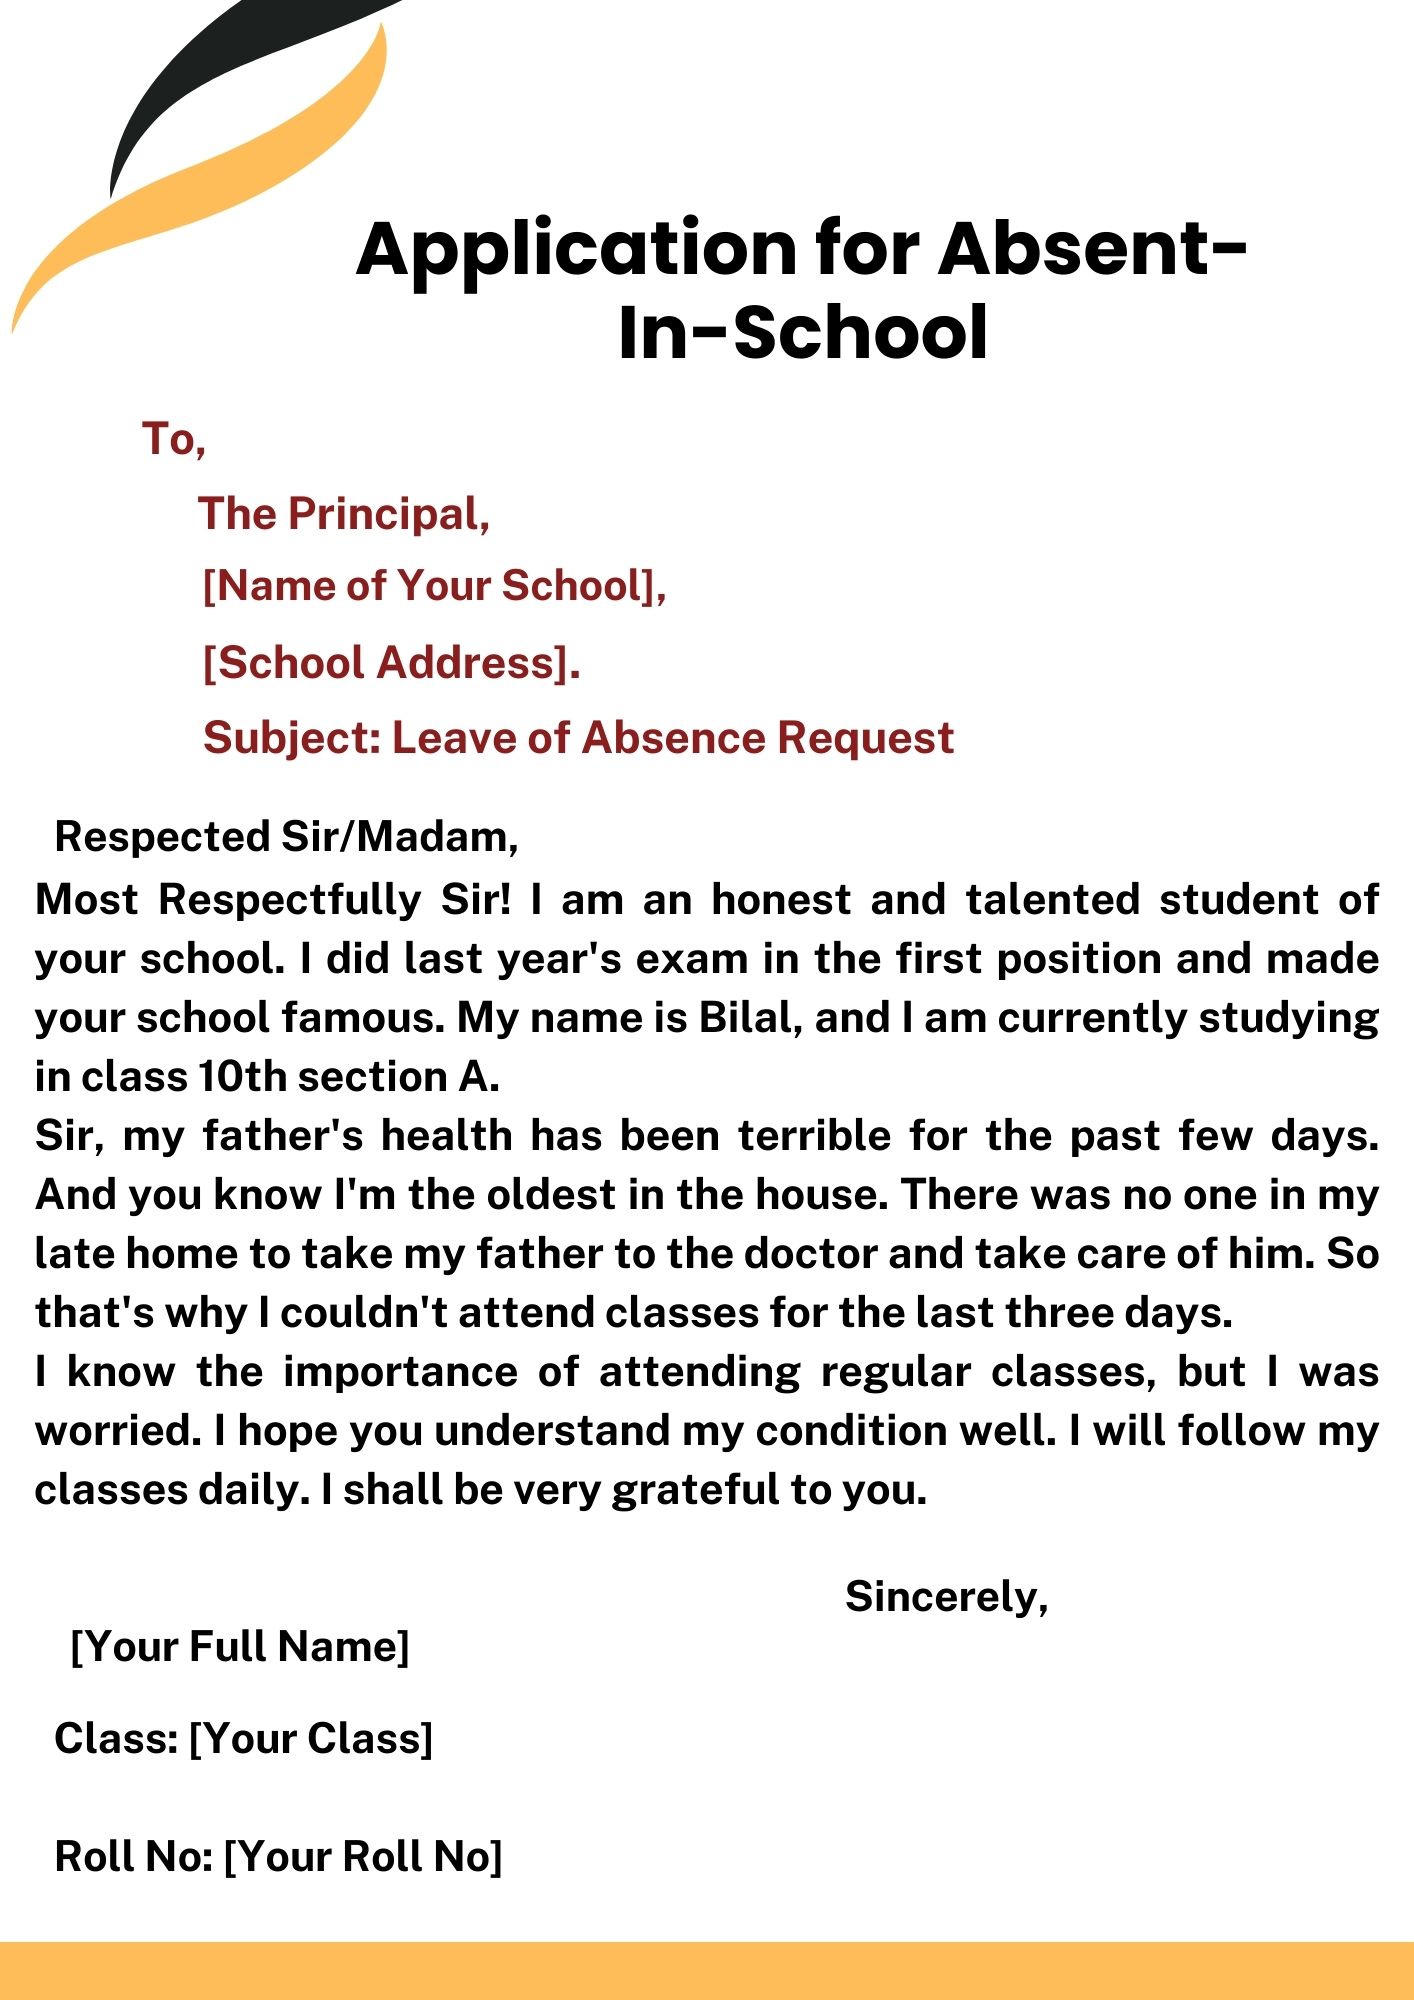  Leave of Absence Request